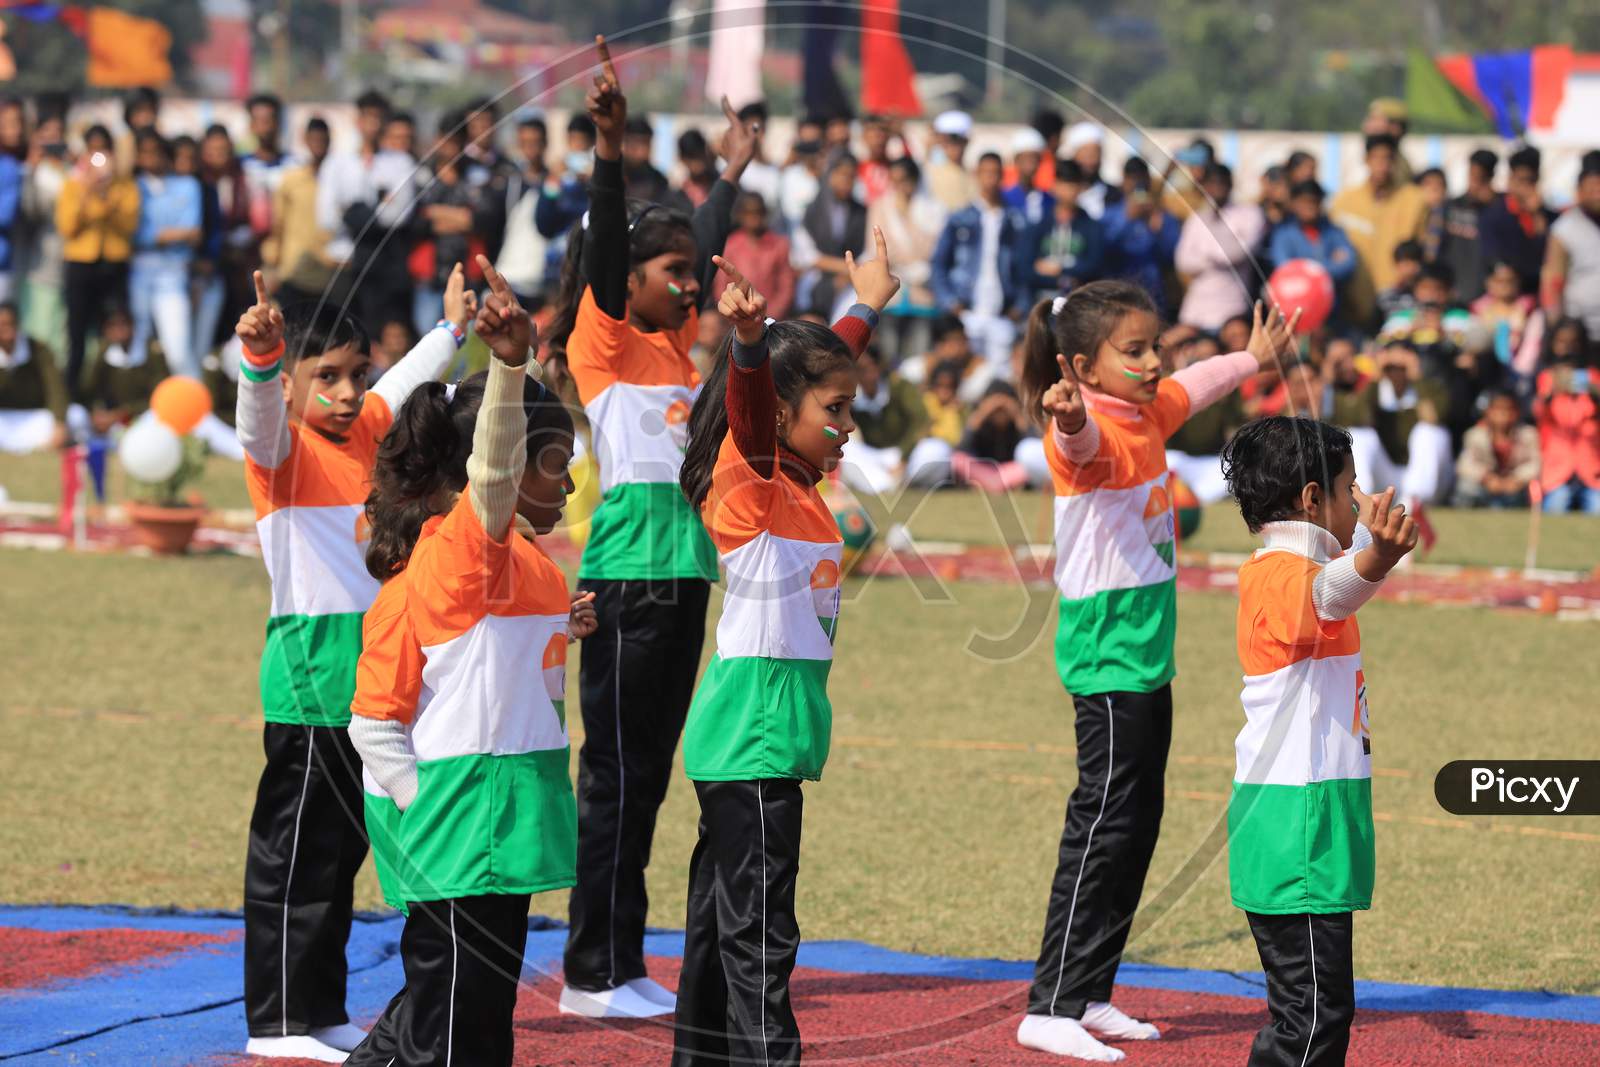 School Girls Performing For Patriotic Songs At Republic Day Parade